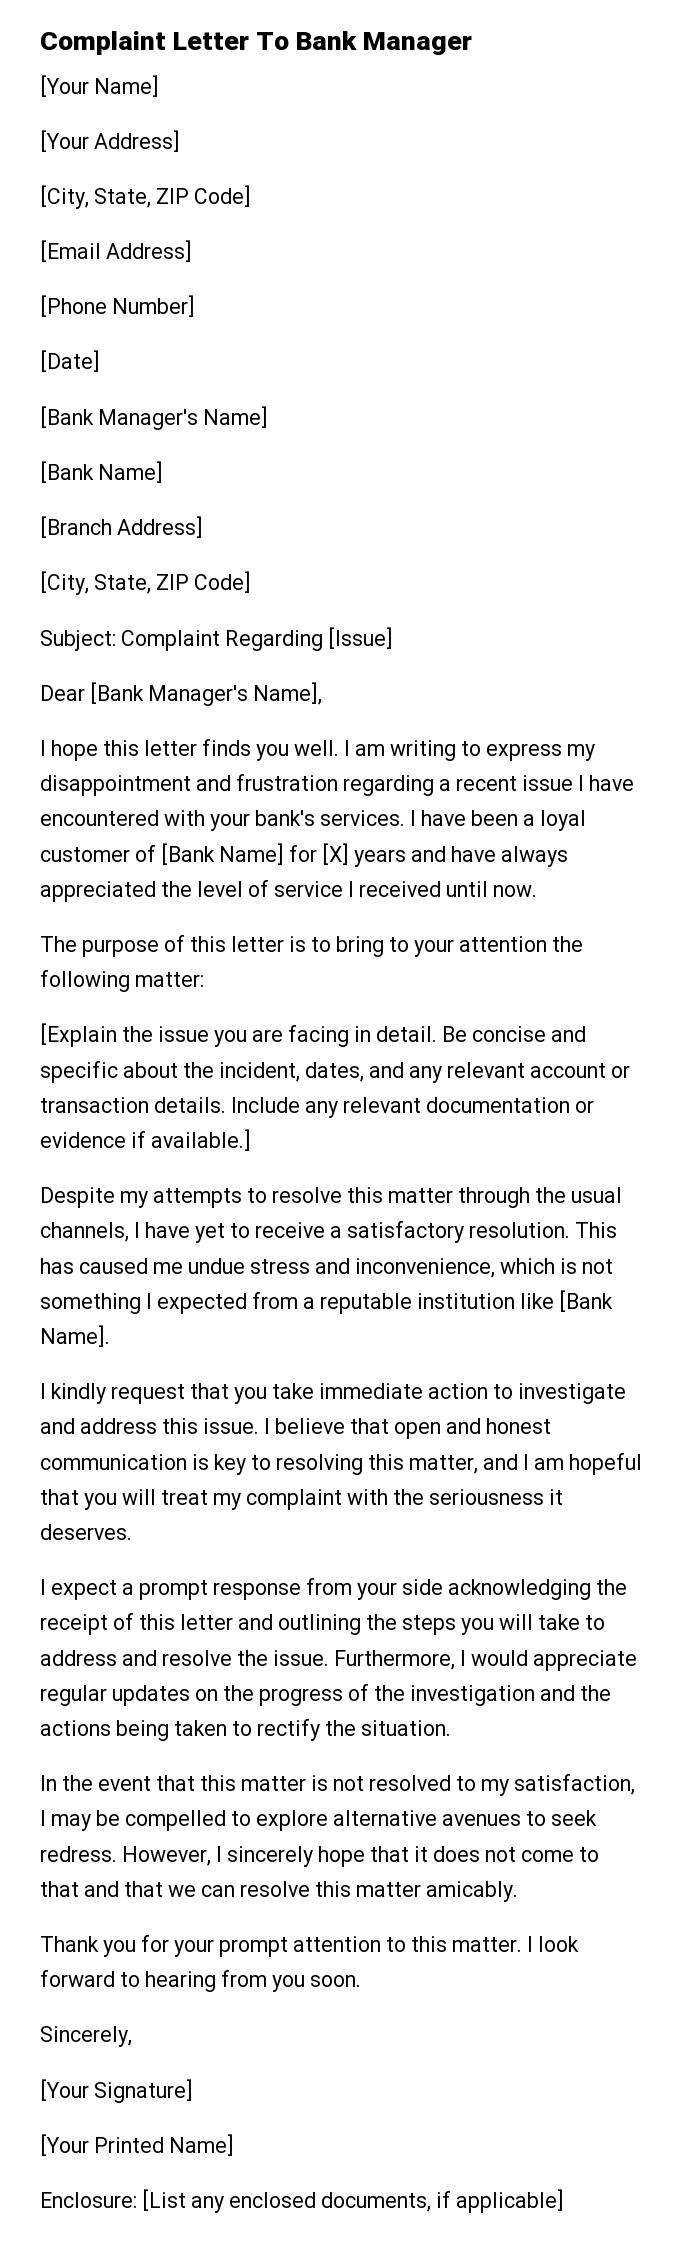 Complaint Letter To Bank Manager